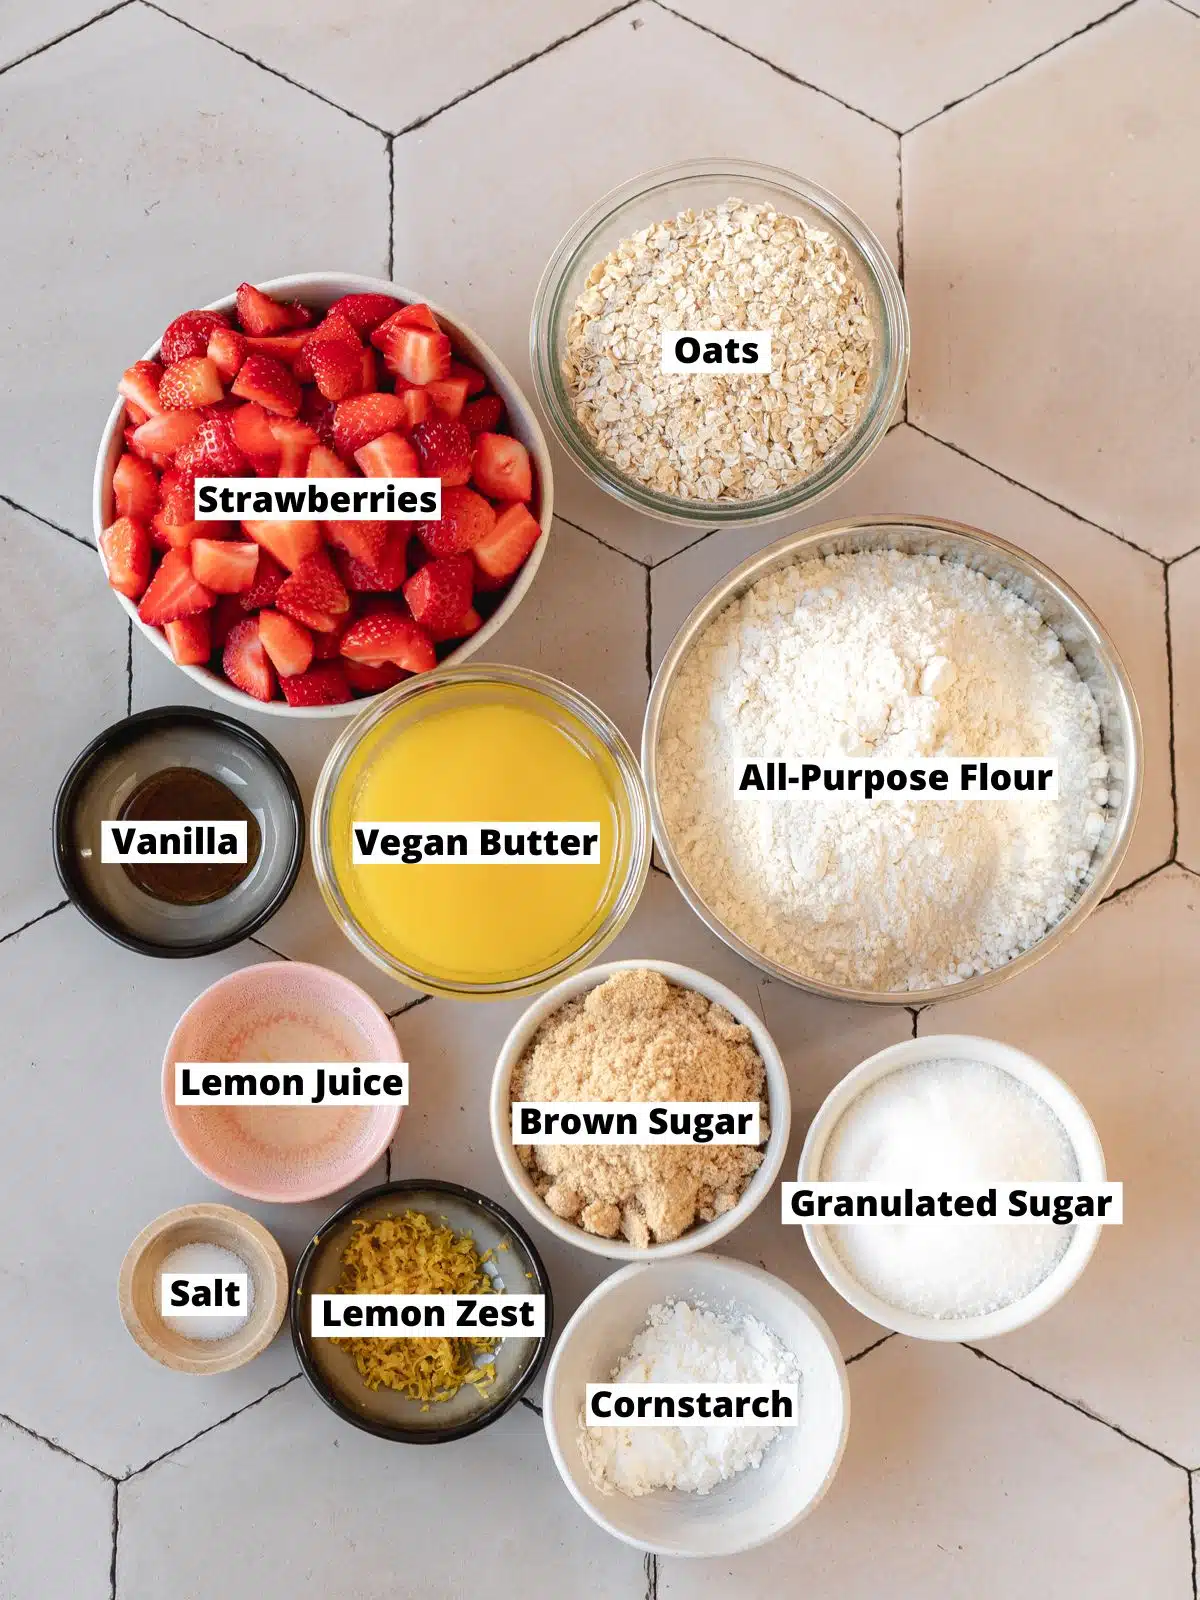 ingredients needed to make vegan strawberry crumble crunch bars measured out into bowls on a white table with text overlay.